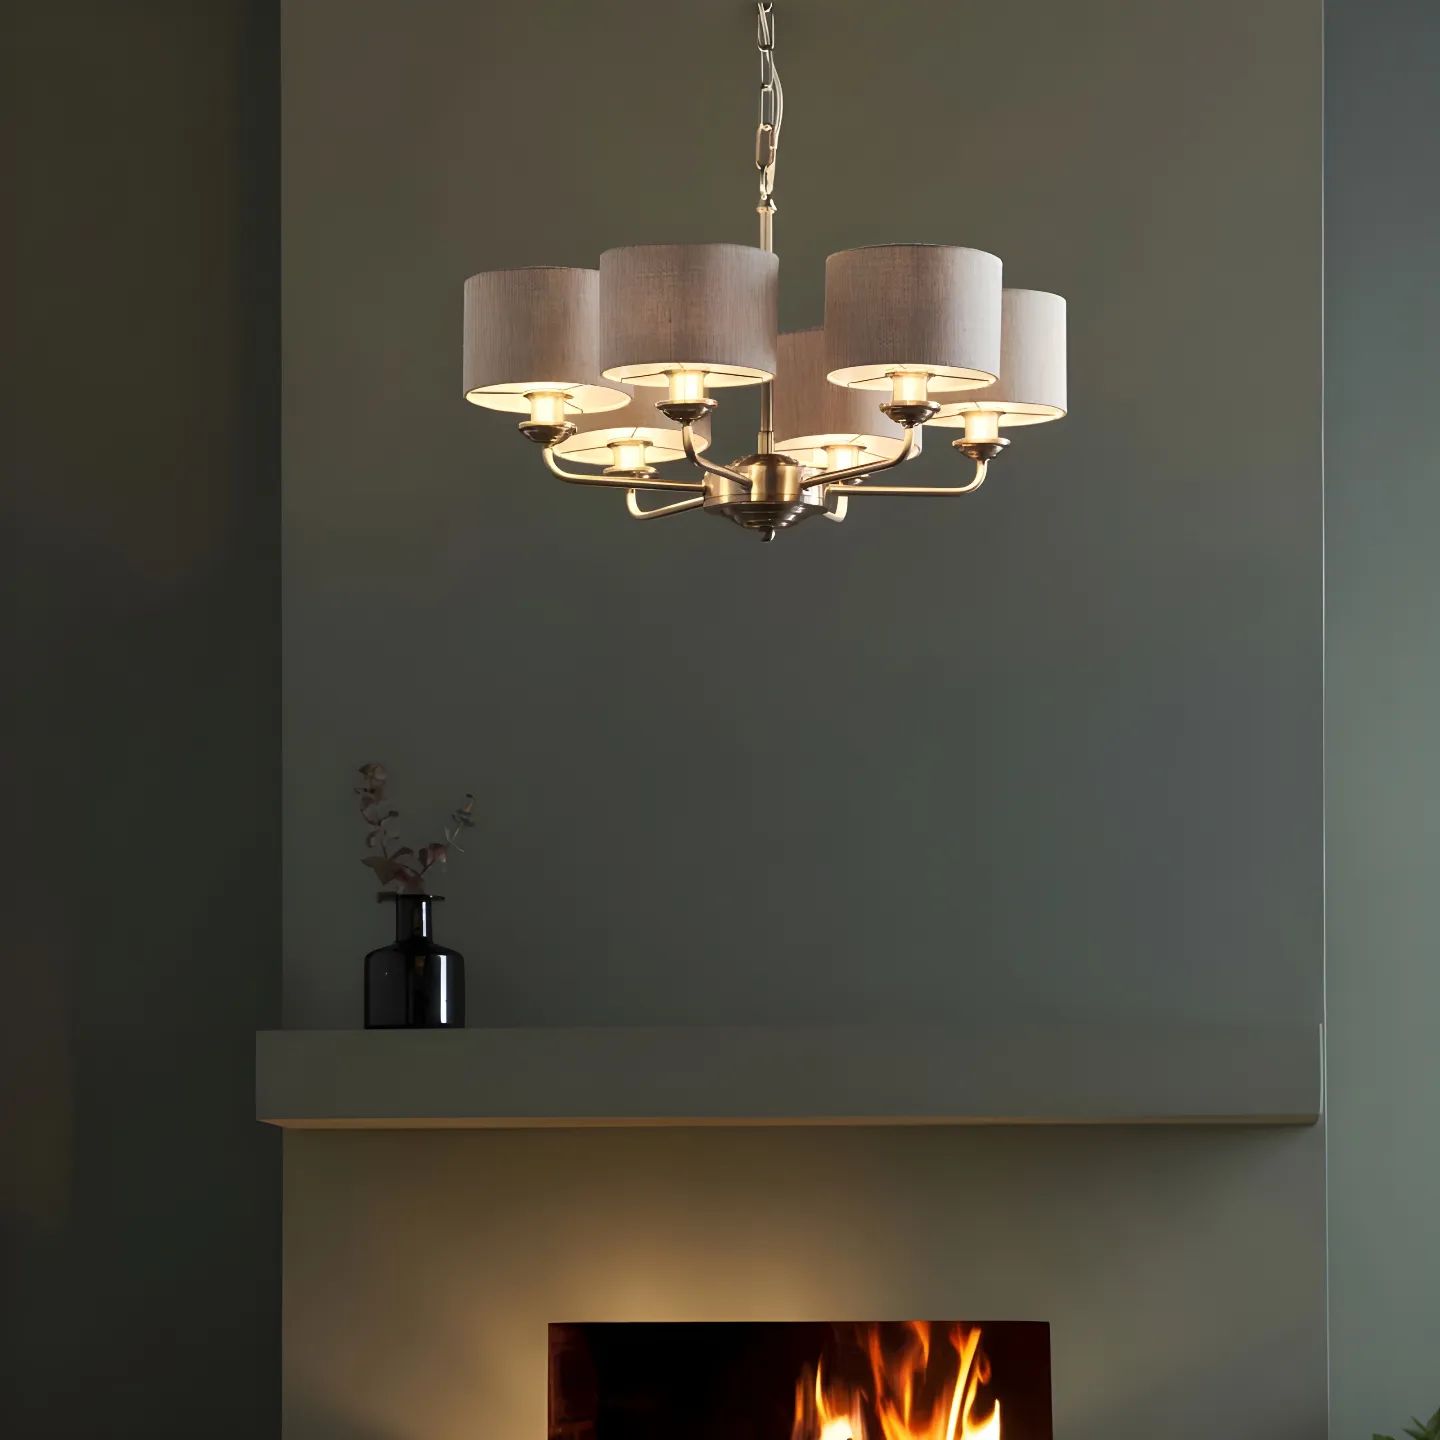 This multi arm pendant is a sophisticated combination of Natural 100% linen fabric shades with brushed metallic inner and brushed chrome plated metalwork. This statement light is the perfect timeless addition to modern and classic homes of today.

Available today in-store and online at stillorgandecor.ie for delivery nationwide.